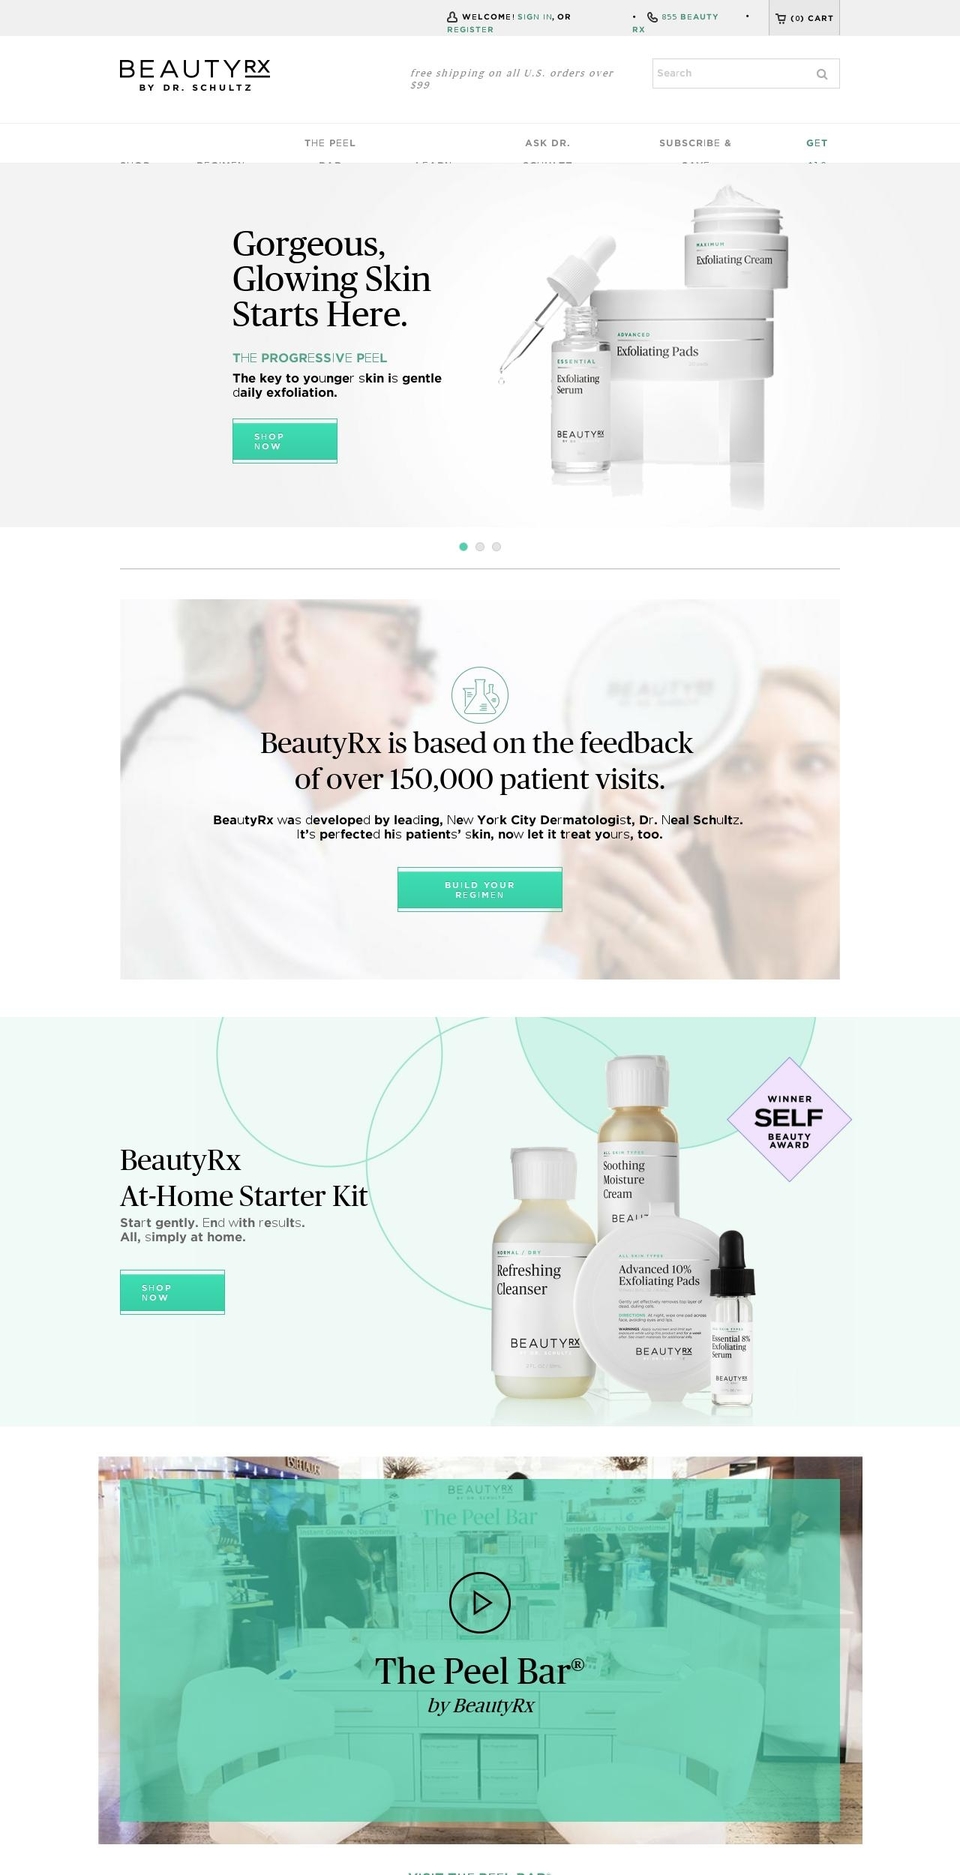 [Mob-20-Feb-18] Beauty RX [BR-248] Shopify theme site example beautyrxstore.com